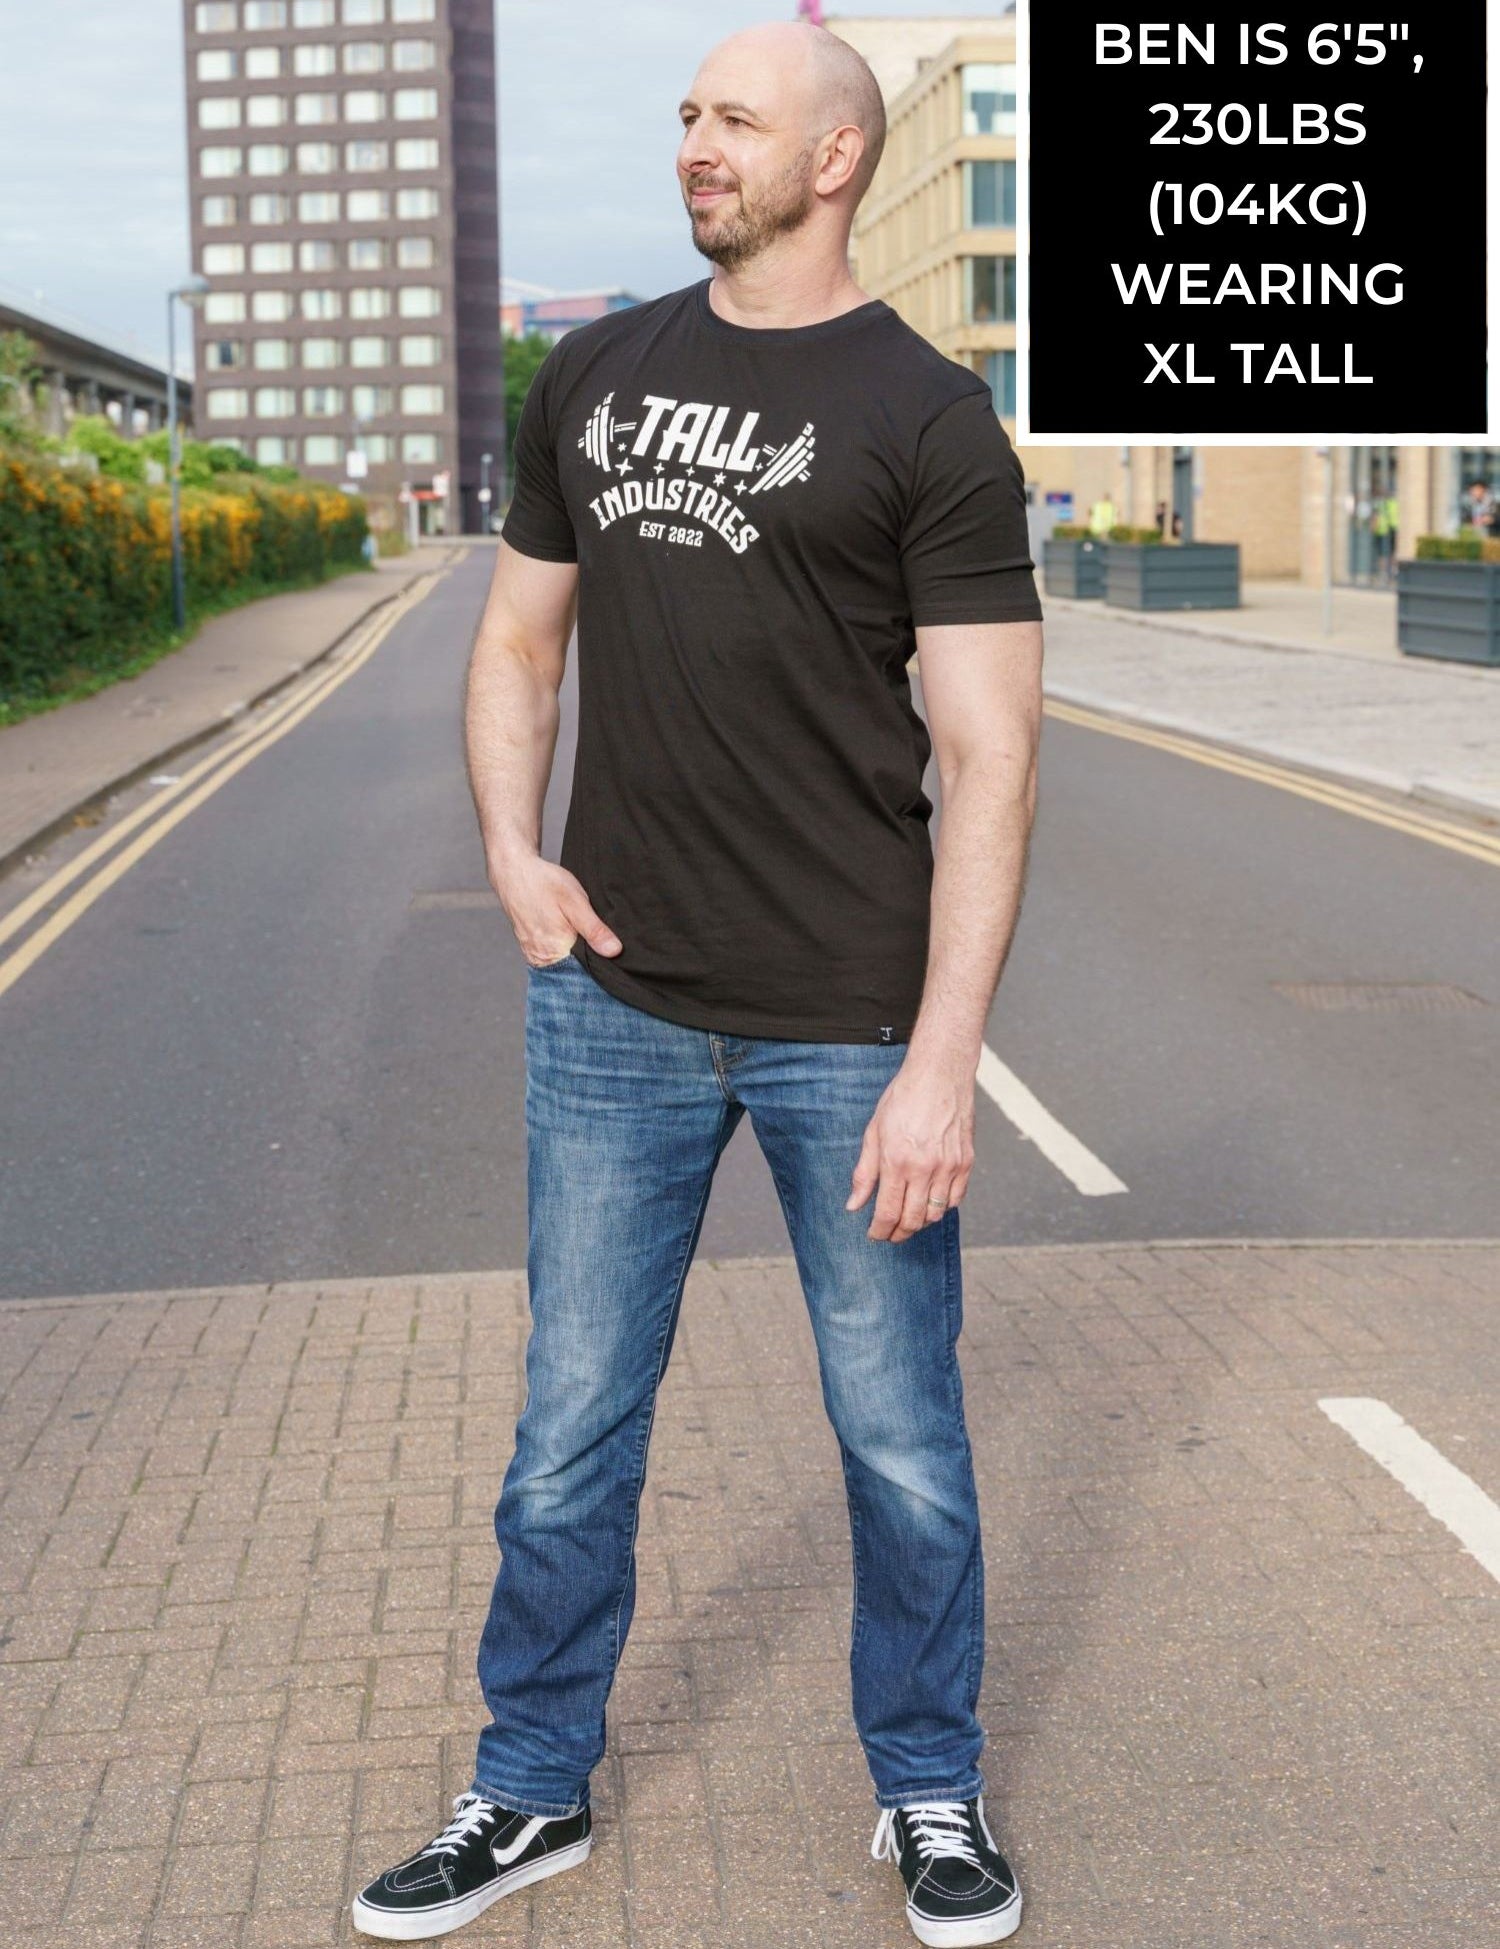 A head to toe shot of a tall skinny guy wearing a tall graphic bodybuilding t-shirt.